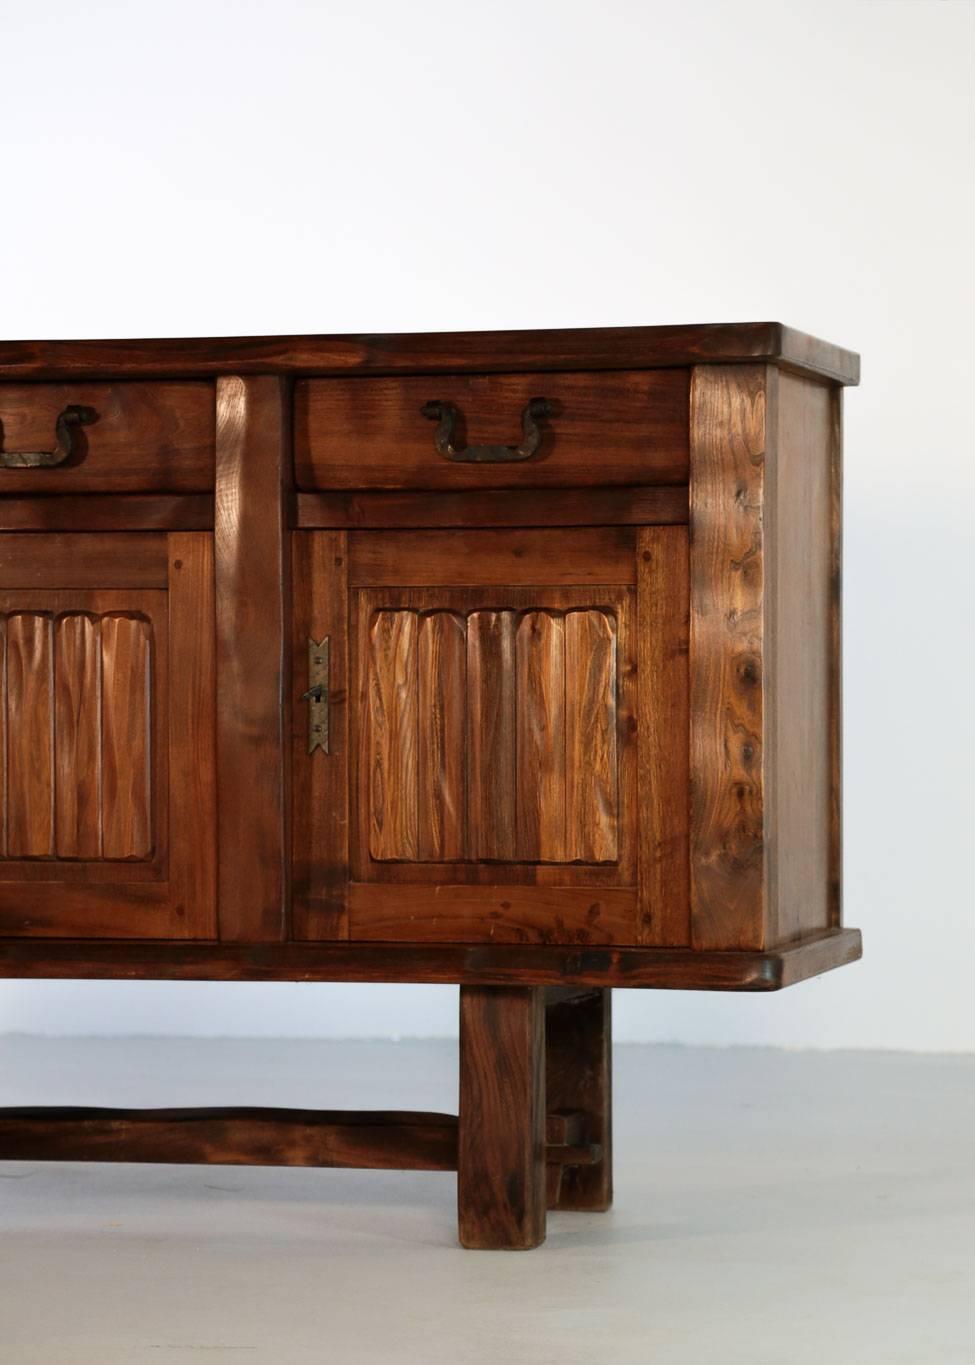 Elm Sideboard by Olavi Hanninen, 1960s In Excellent Condition For Sale In Ternay, Auvergne-Rhône-Alpes